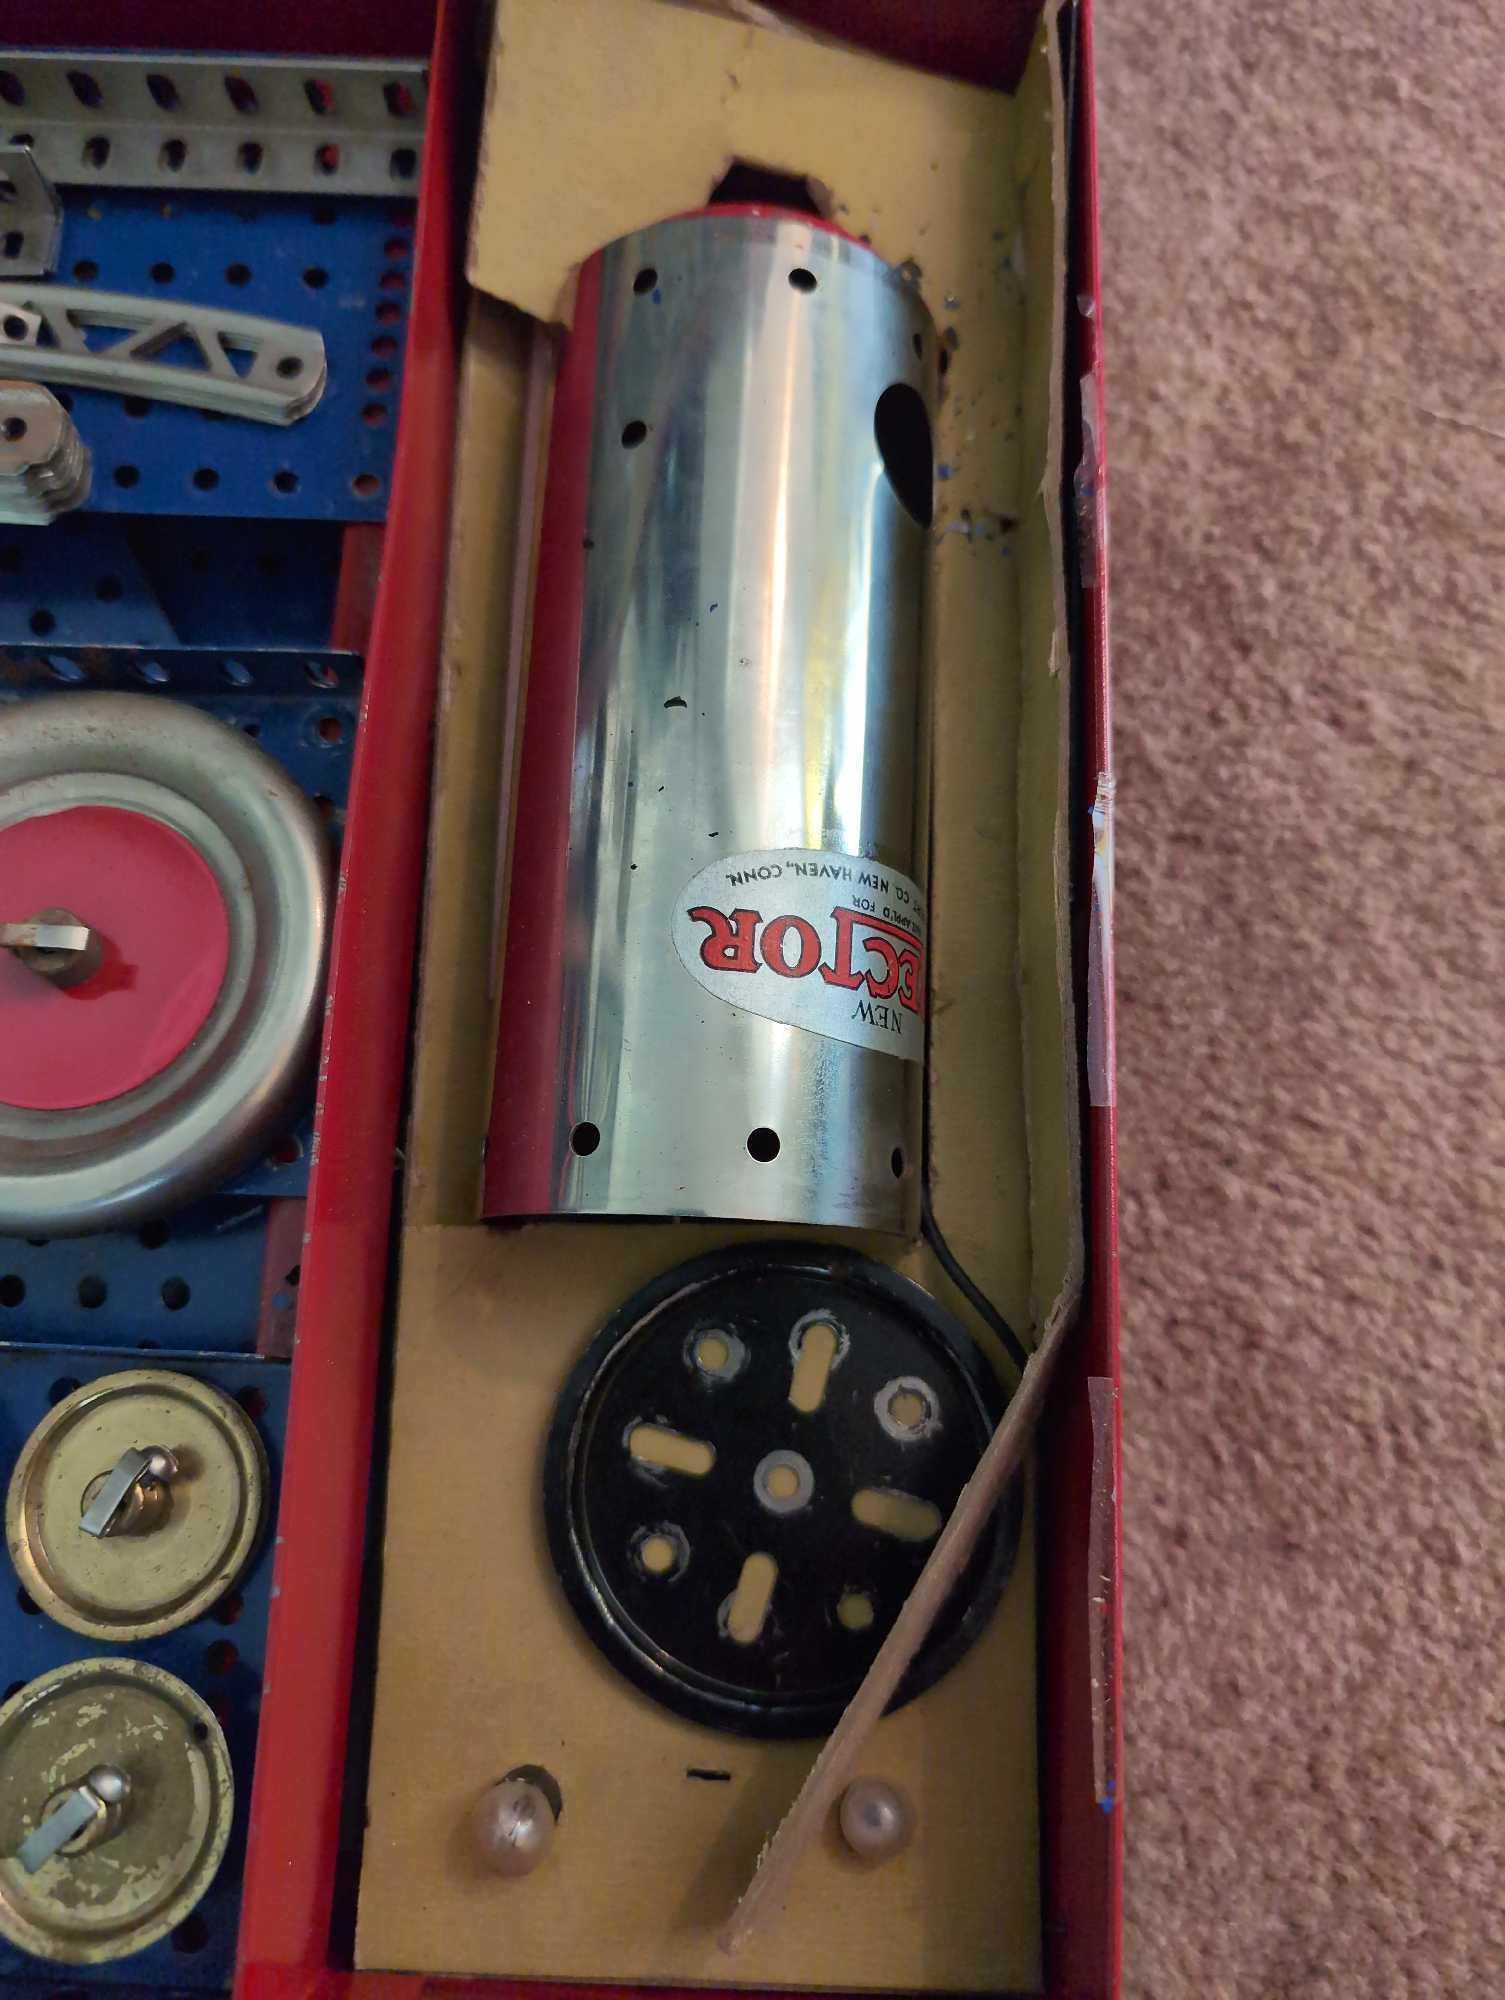 (LR) VINTAGE A.C. GILBERT COMPANY NO. 8-1/2 ALL-ELECTRIC ERECTOR SET. SEEMS TO BE IN DECENT